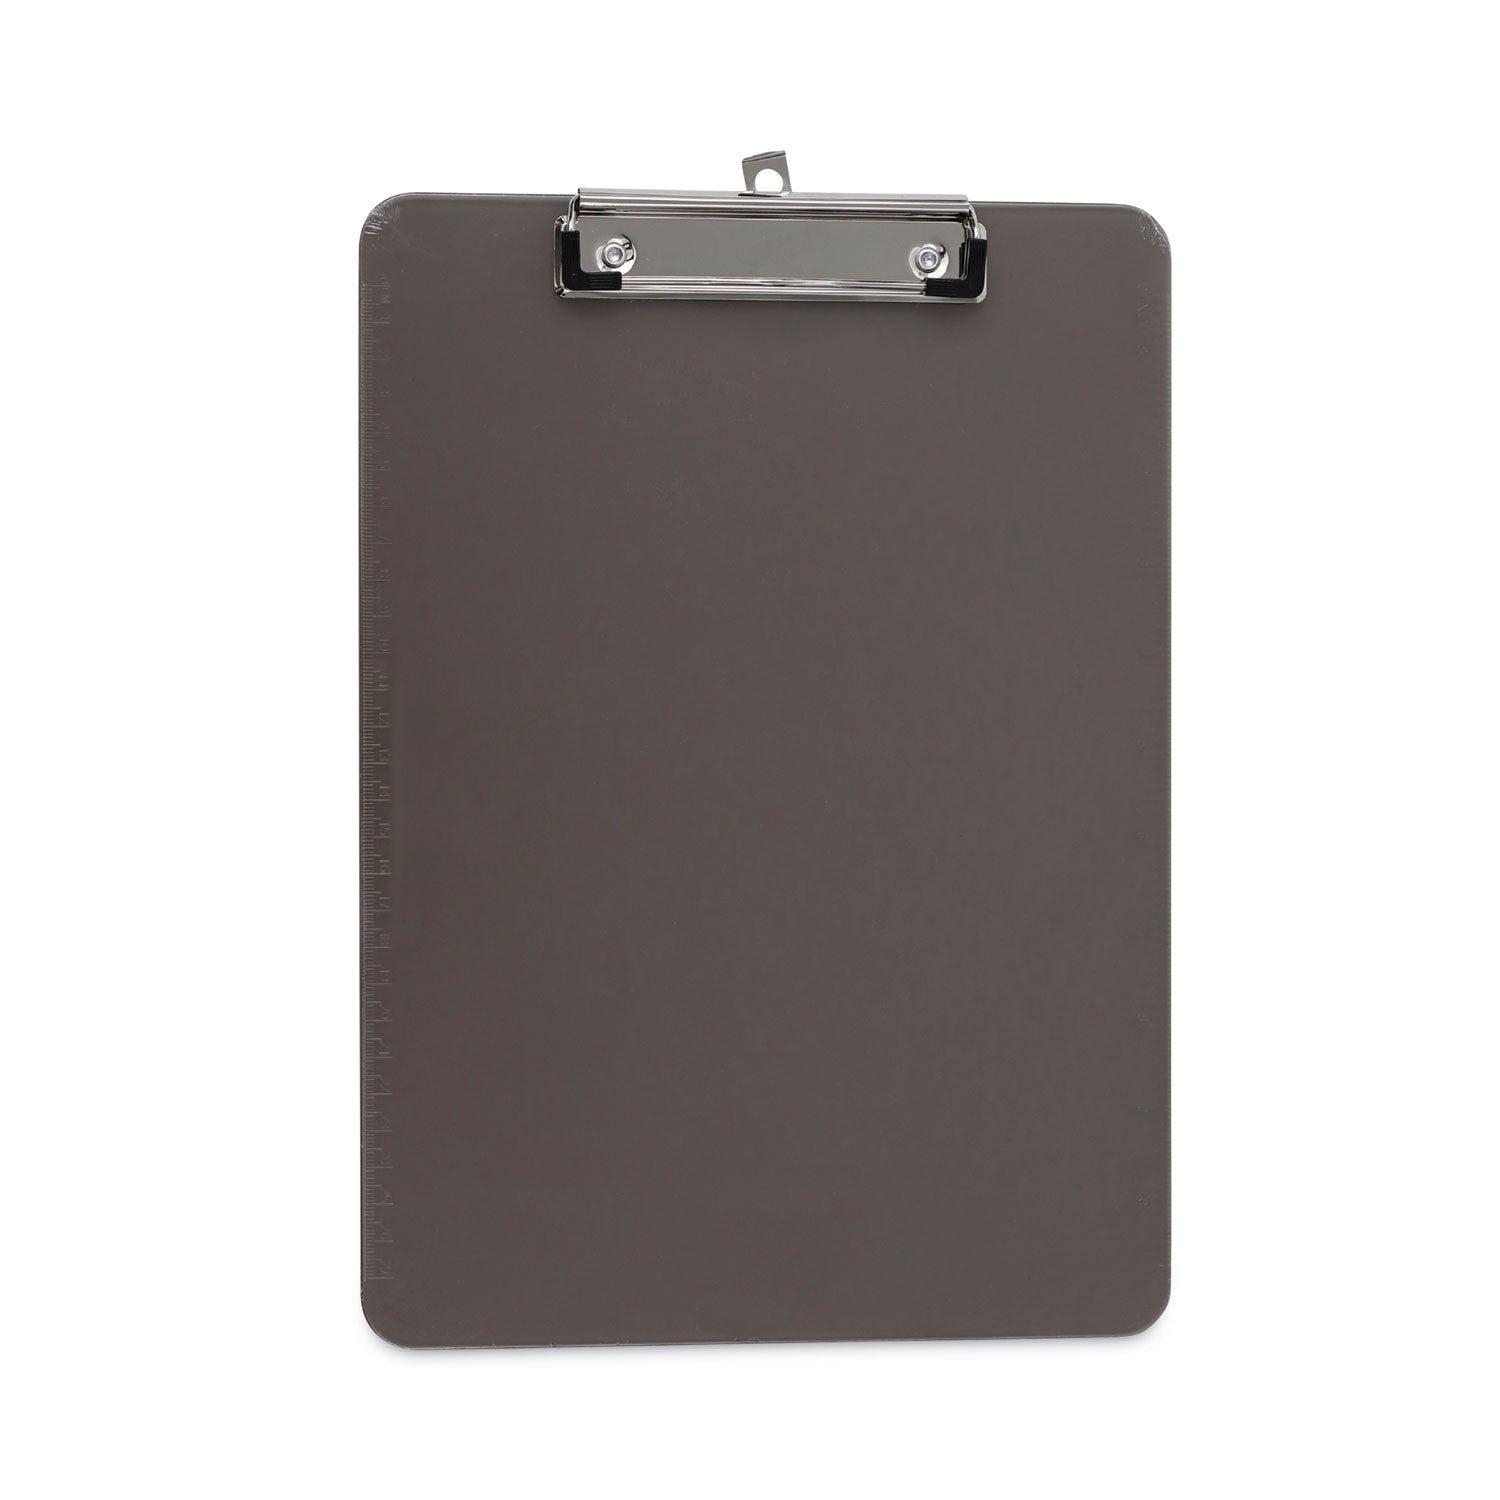 plastic-clipboard-with-low-profile-clip-05-clip-capacity-holds-85-x-11-sheets-translucent-black_unv40311 - 1